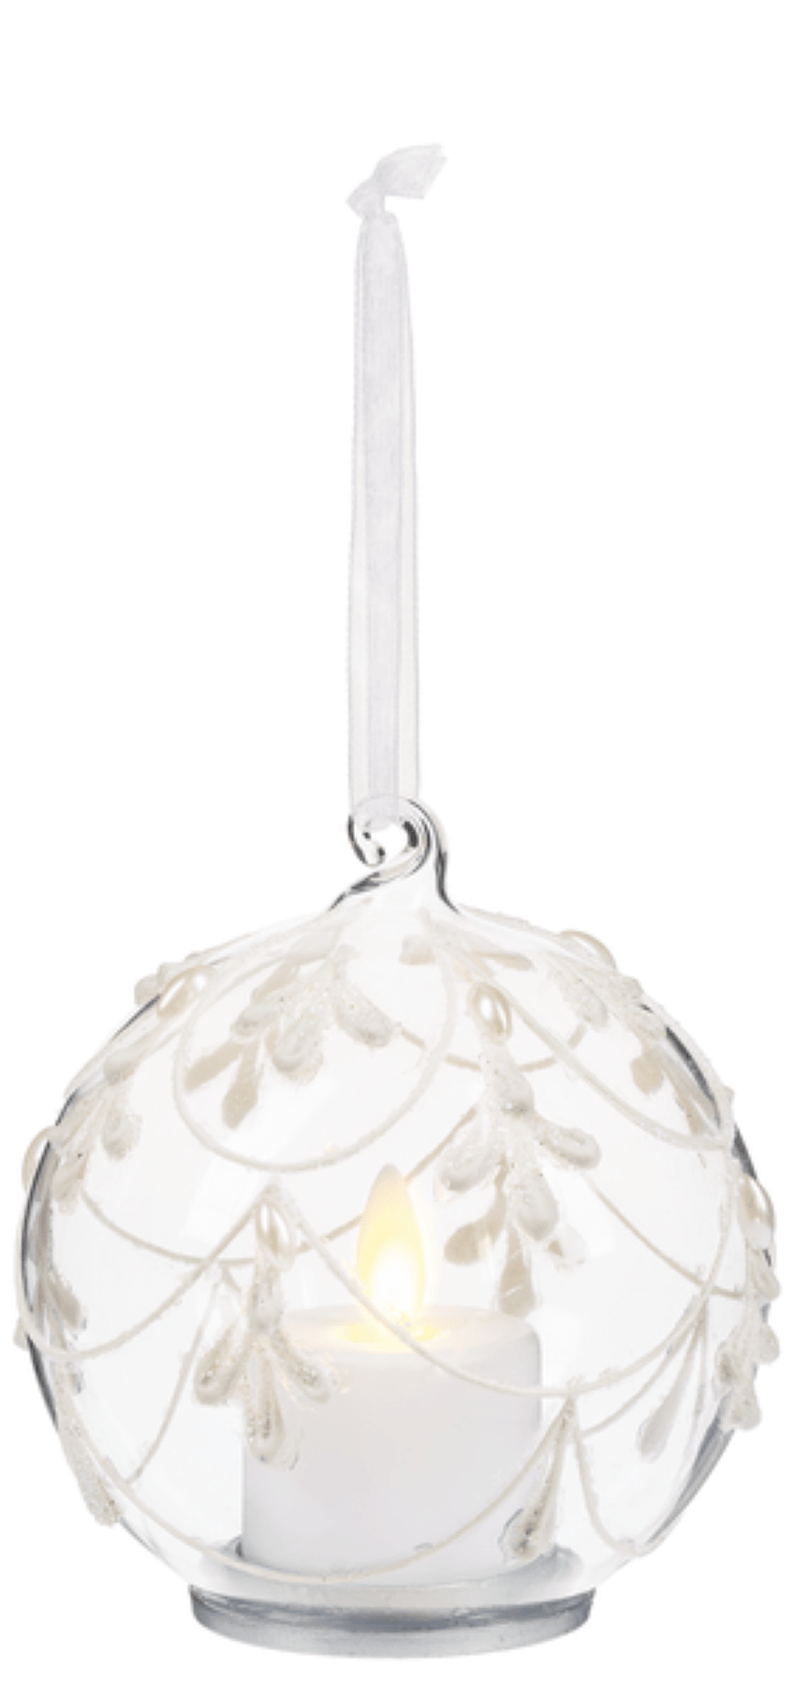 Icicle Ball Ornament with Flickering Flame LED -  Curvy Lines - Shelburne Country Store